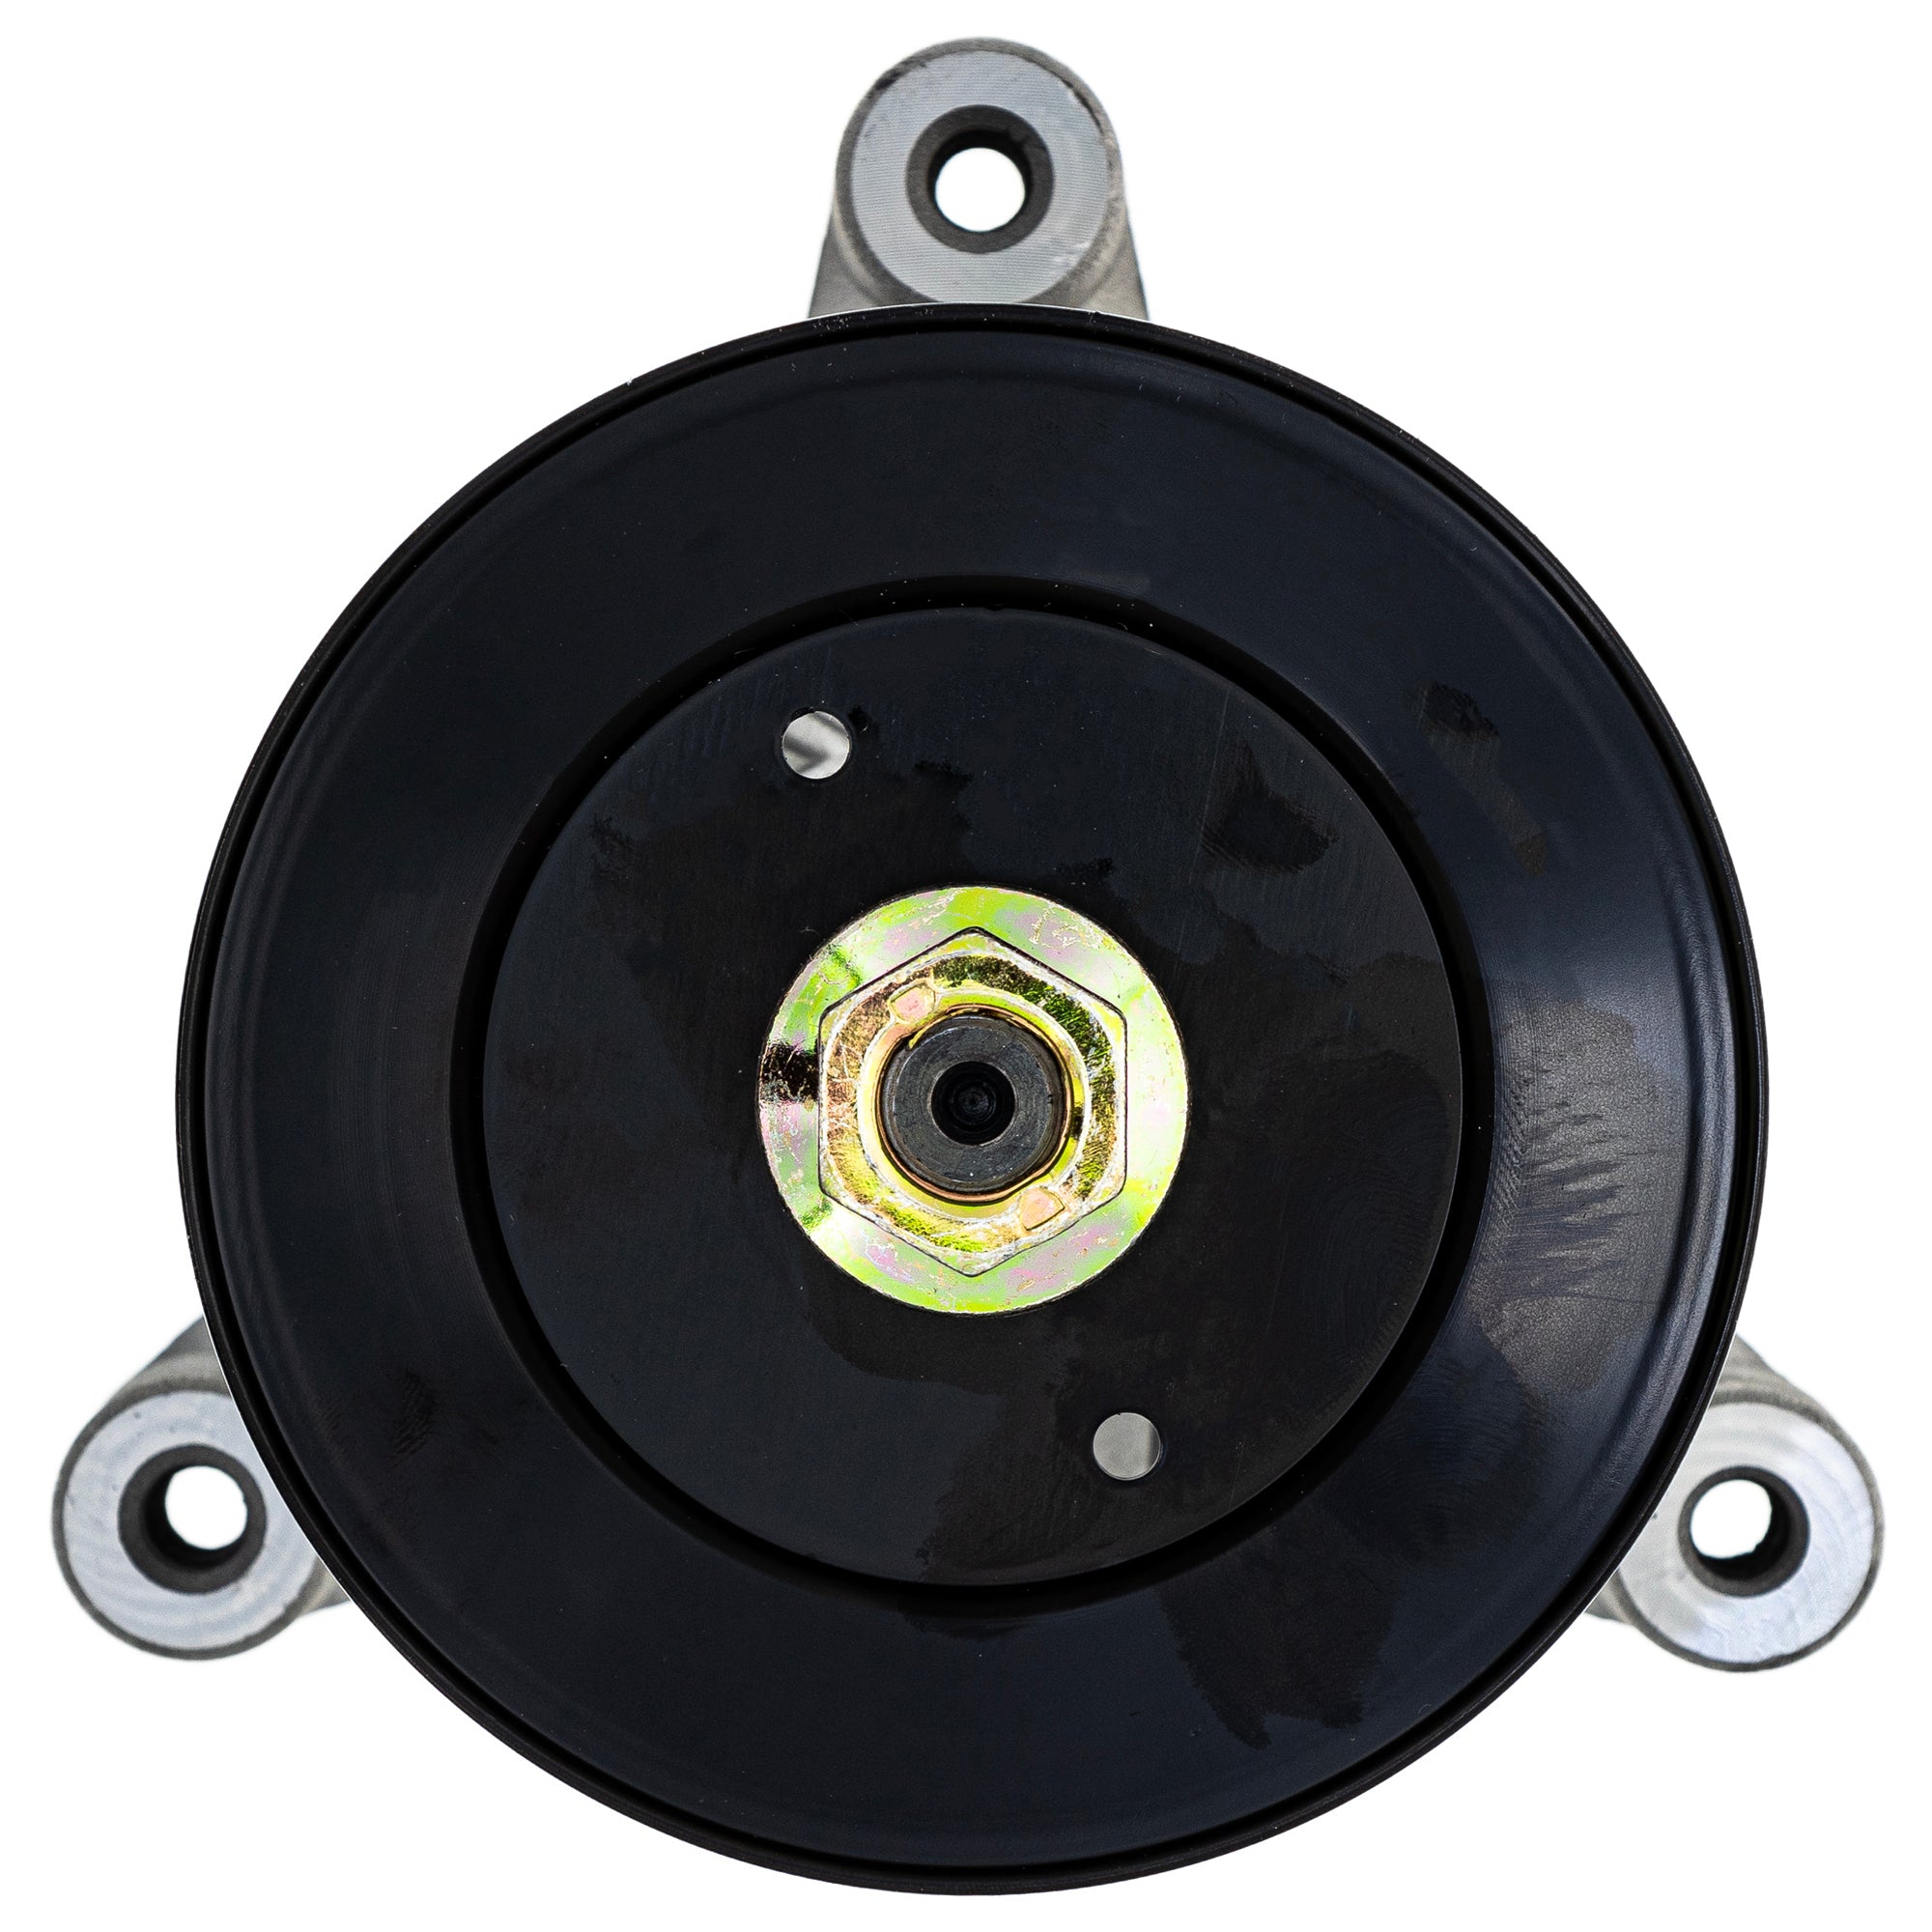 Mower Spindle for AYP Husqvarna GT200 532137152 532173434 46-Inch Deck